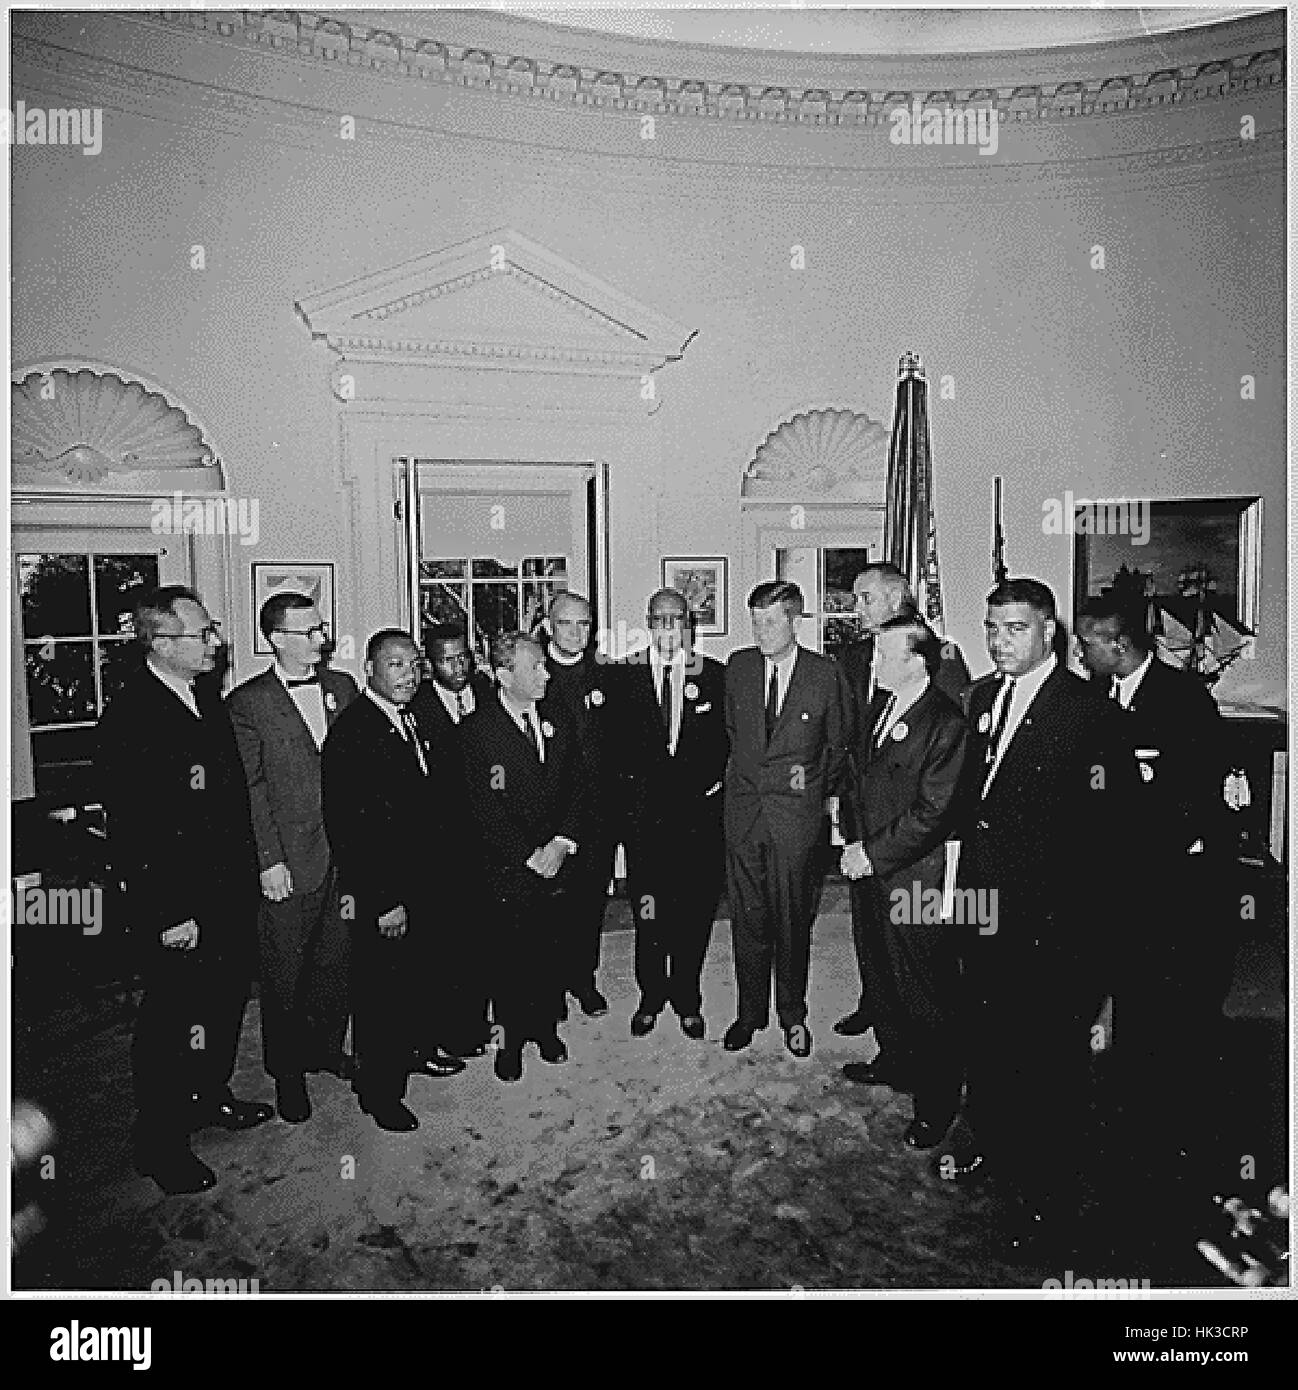 Photograph of United States President John F. Kennedy's meeting in the Oval Office of the White House in Washington, DC with the leaders of the March on Washington on August 28, 1963. From left to right: Willard Wirtz, Martin Luther King, Jr., Eugene Cars Stock Photo